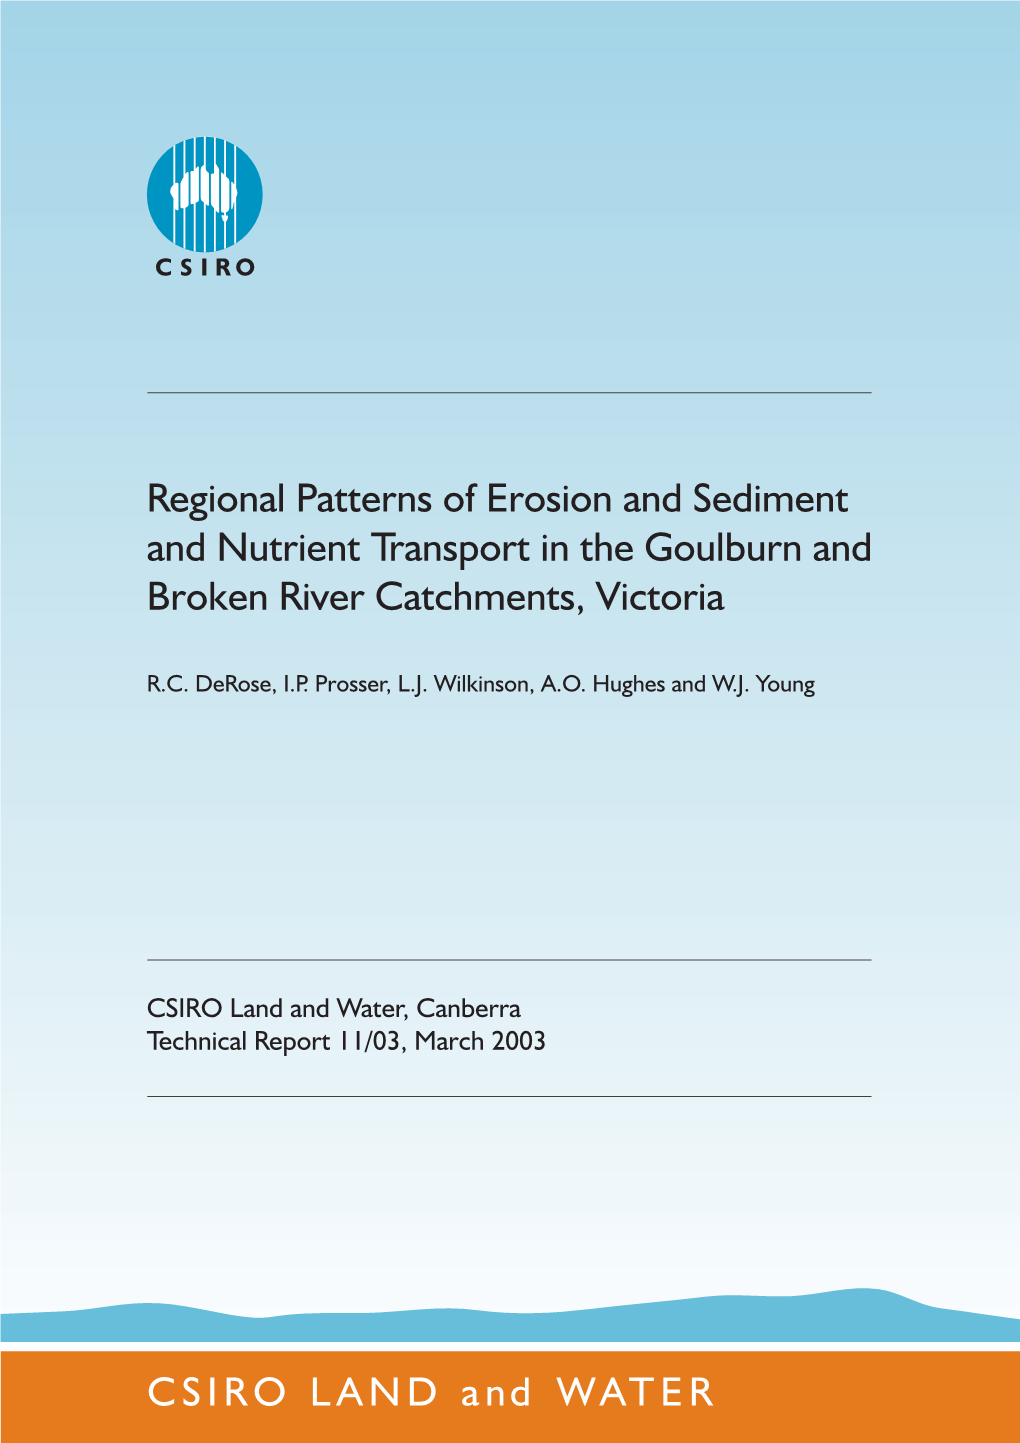 Regional Patterns of Erosion and Sediment and Nutrient Transport in the Goulburn and Broken River Catchments, Victoria